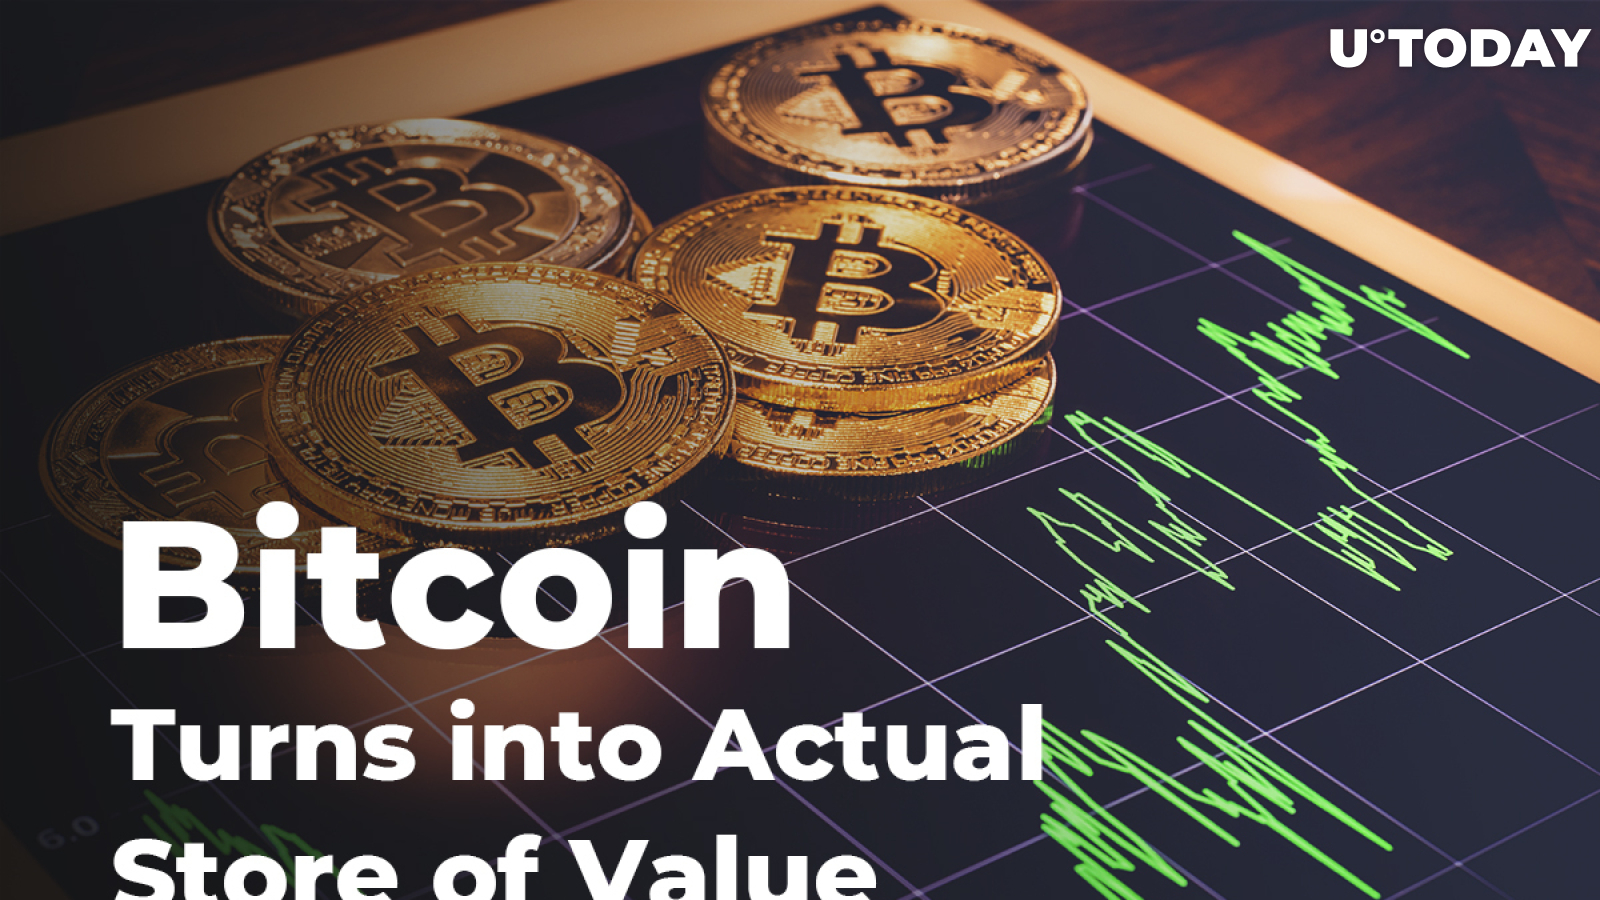 Bitcoin Turns into Actual Store of Value – 60% BTC Has Remained in Wallets at Least One Year